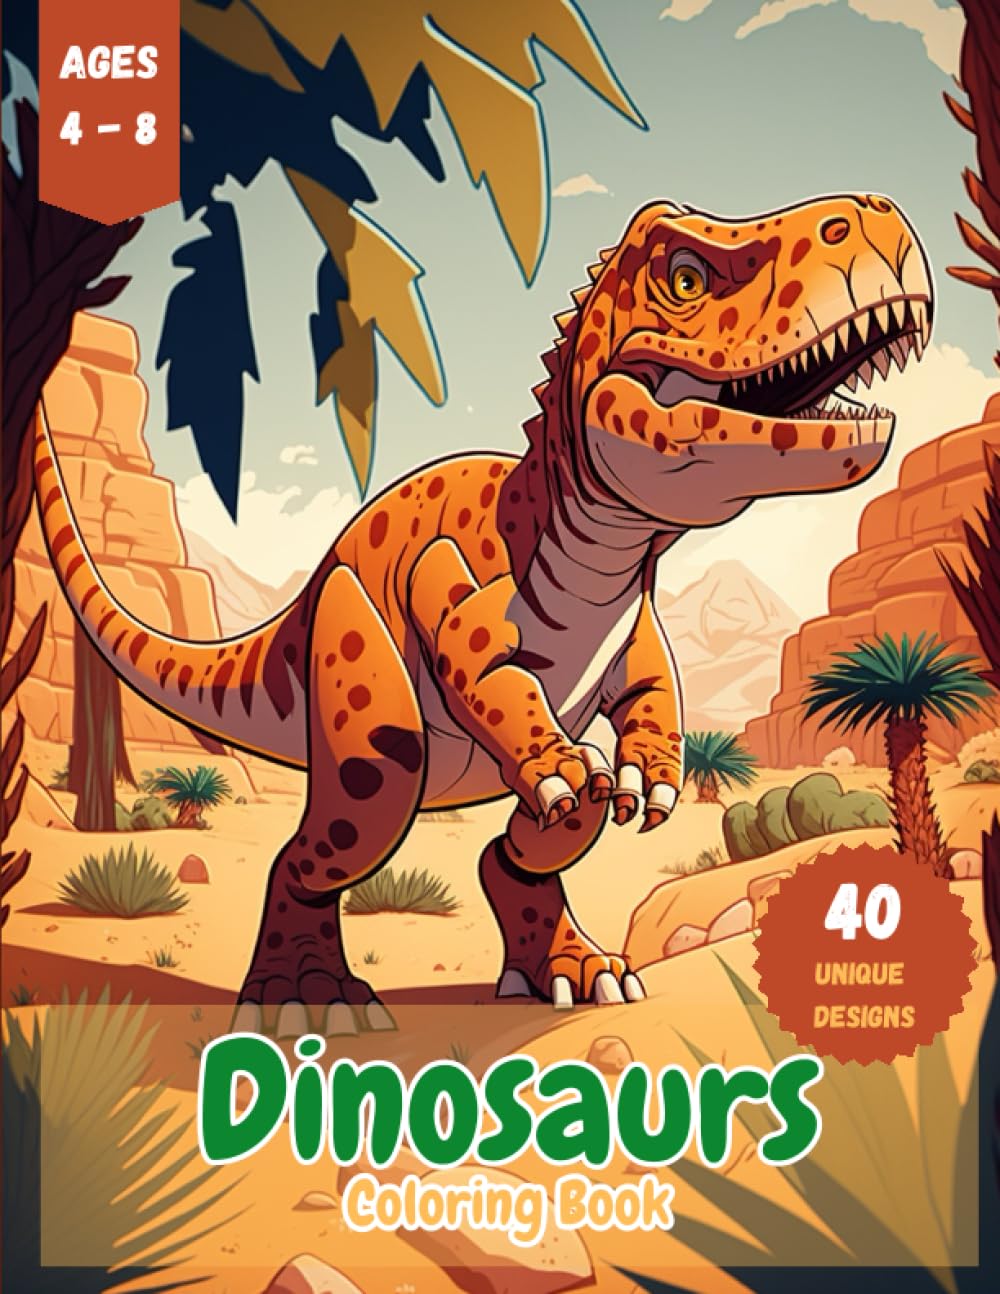 Dinosaurs Coloring Book for Kids ages 4-8: Roar into Prehistoric Fun with 40 Unique Dinosaur Designs: A Coloring Book for Kids Ages 4-8